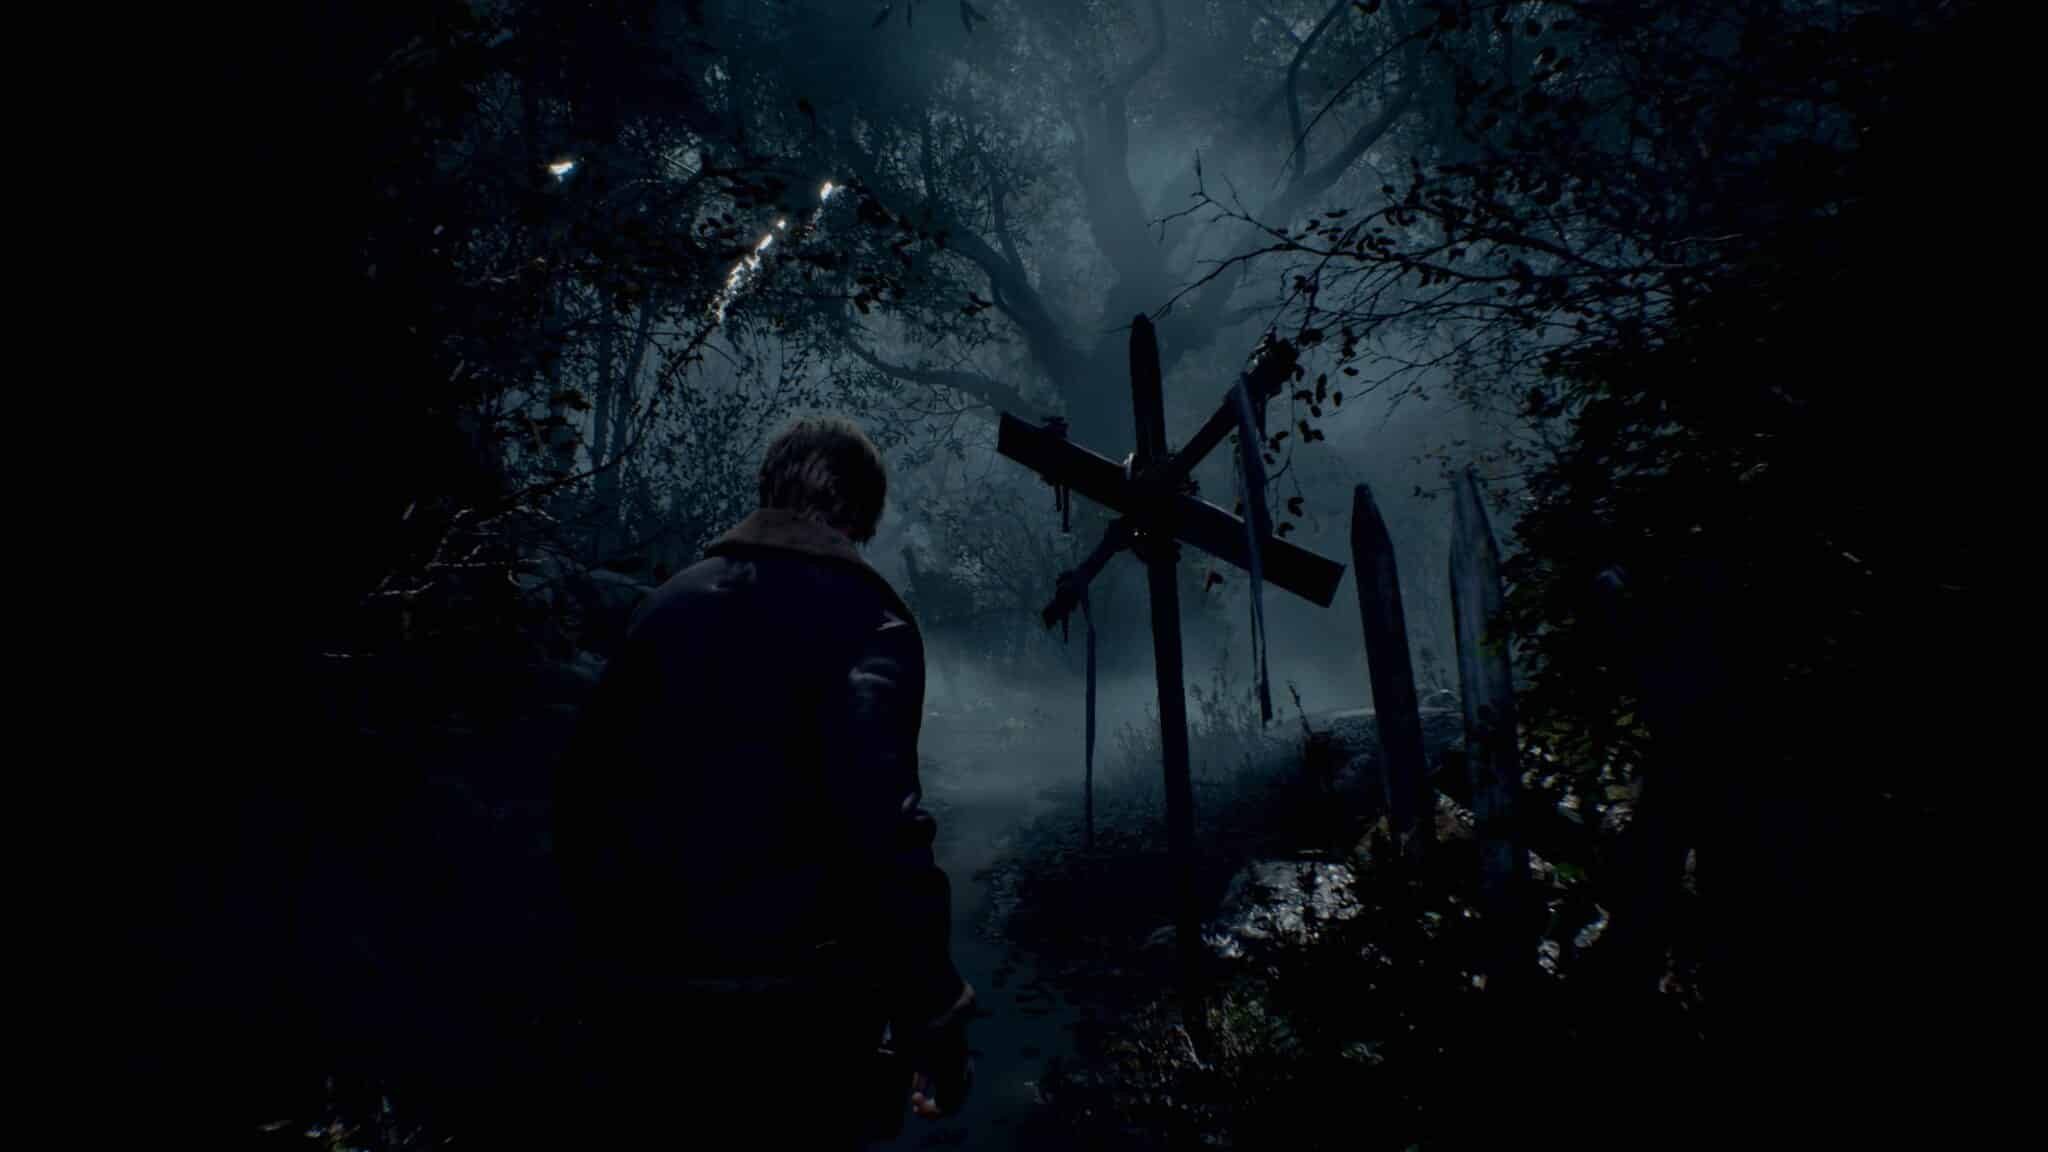 (The gloomy forest gives the game an eerie atmosphere right at the beginning. Best creepy feeling.)